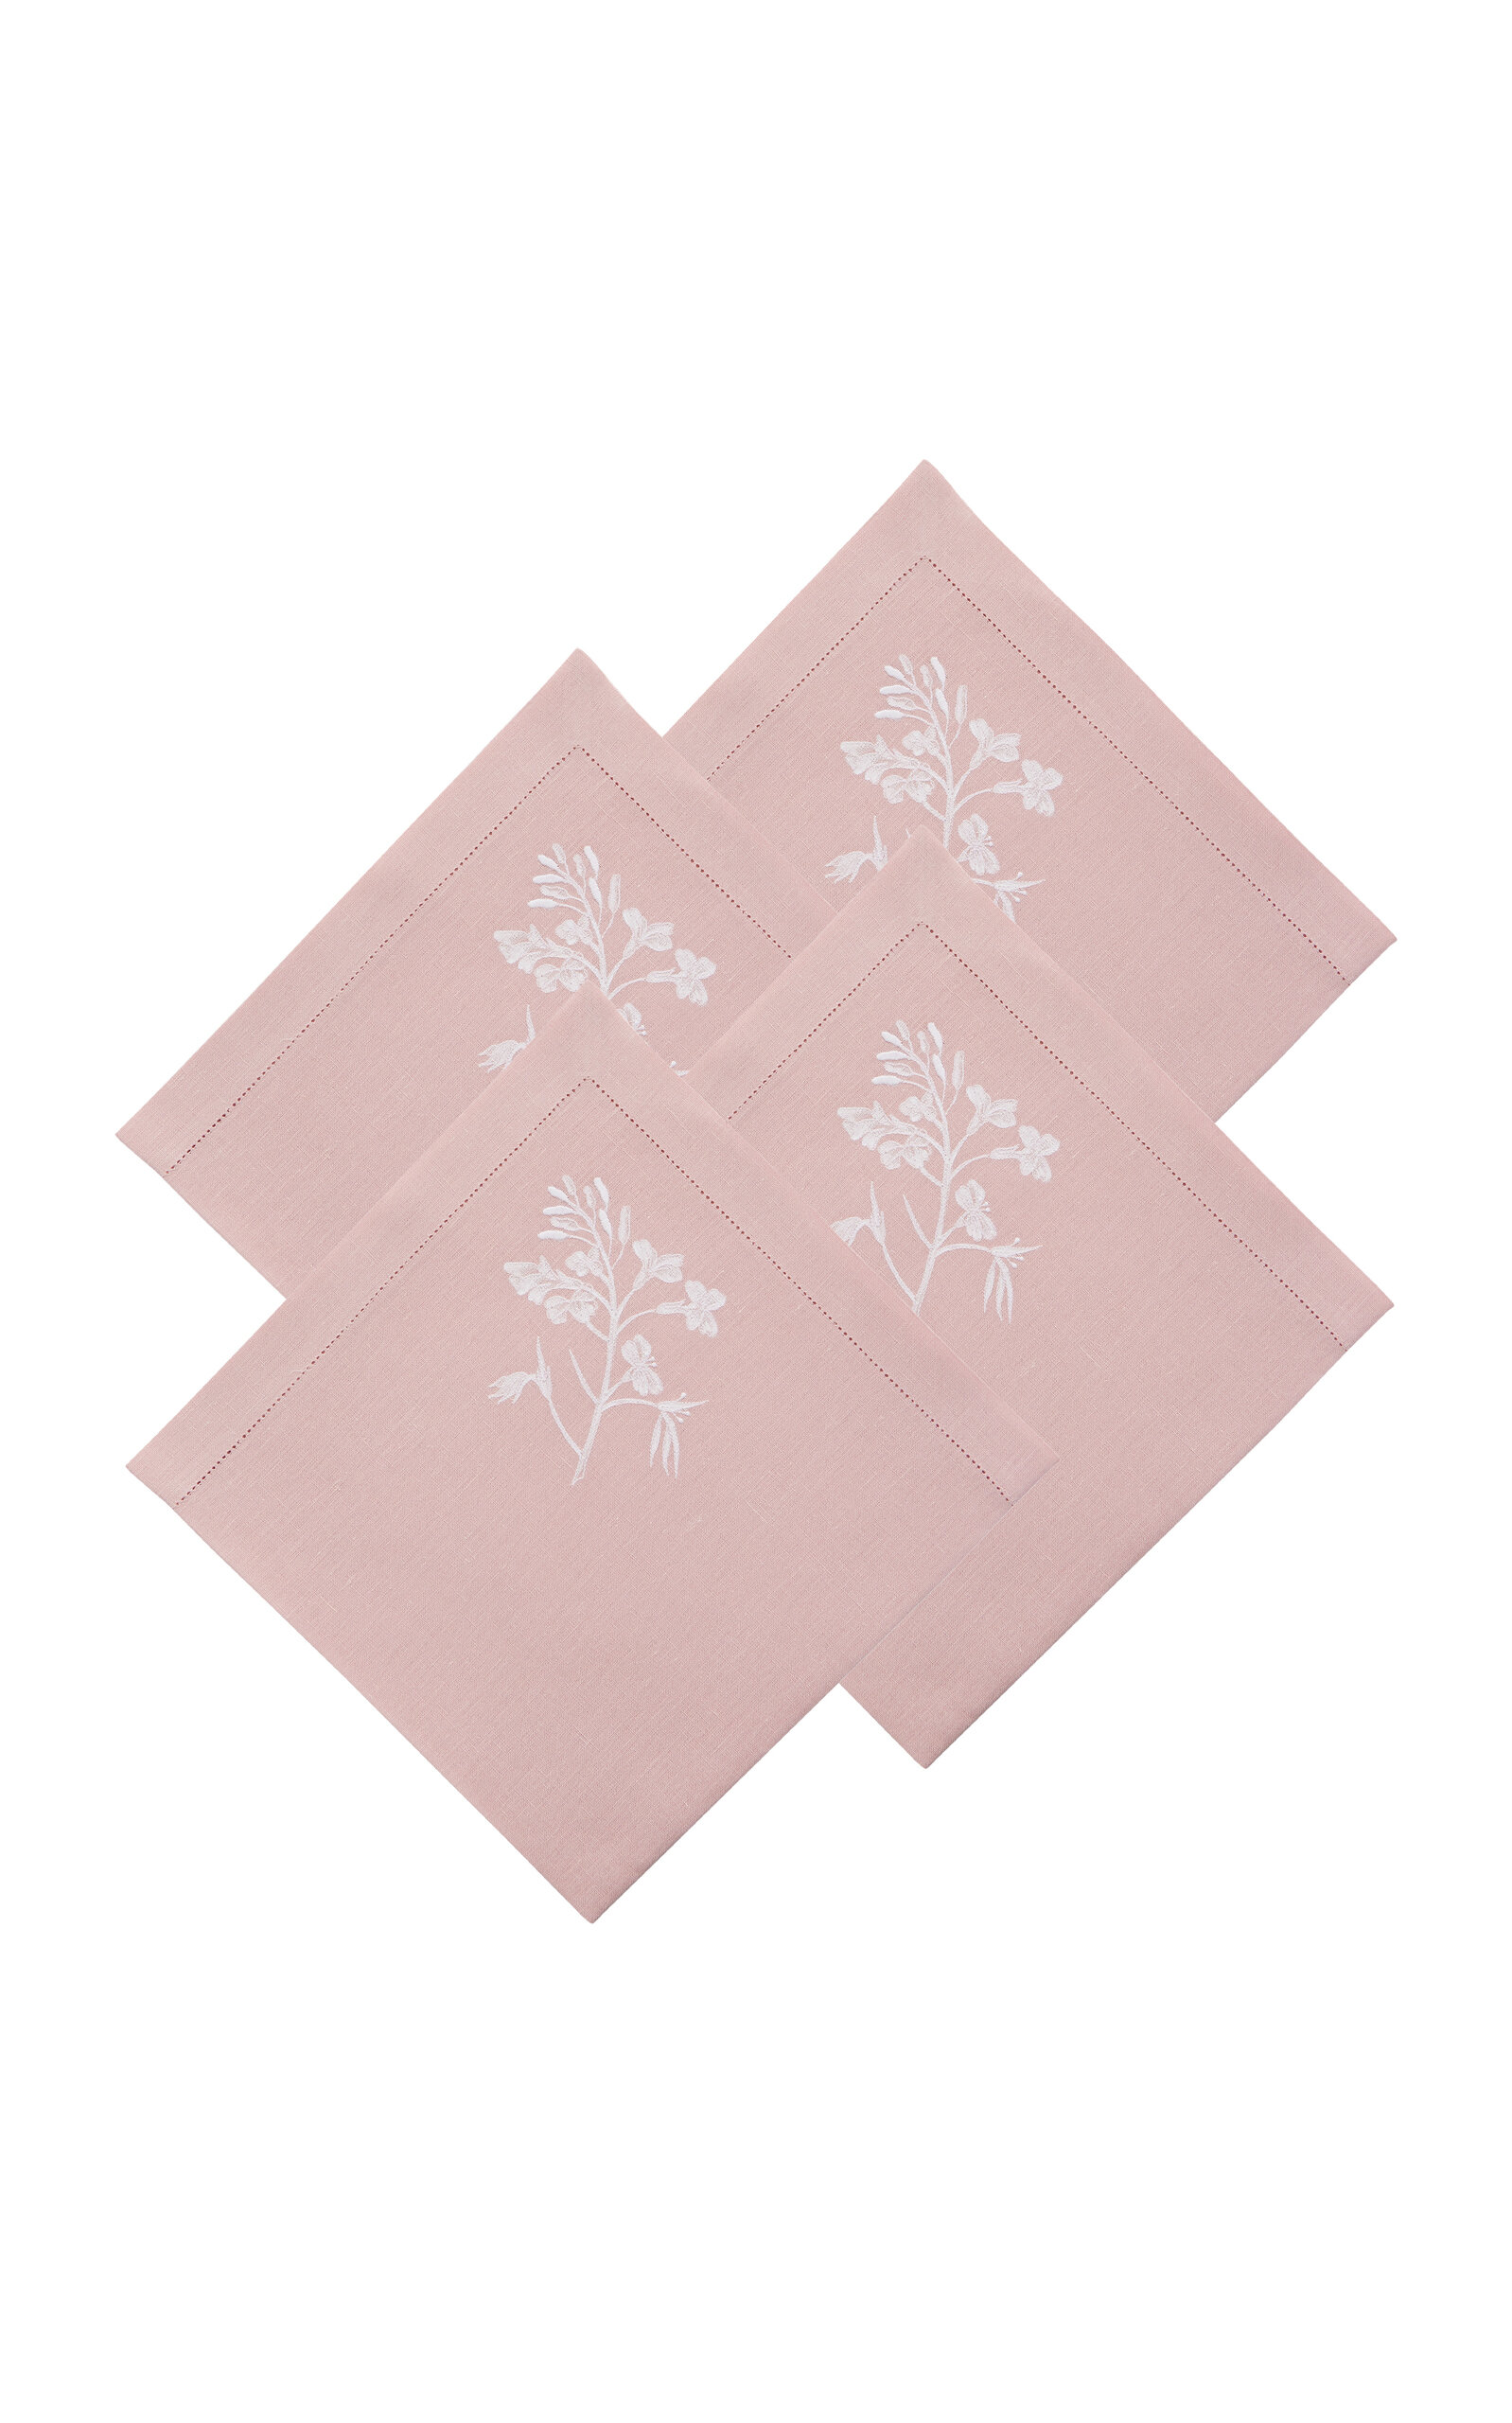 Atelier Houria Tazi Laure Set-of-four Napkins In Pink